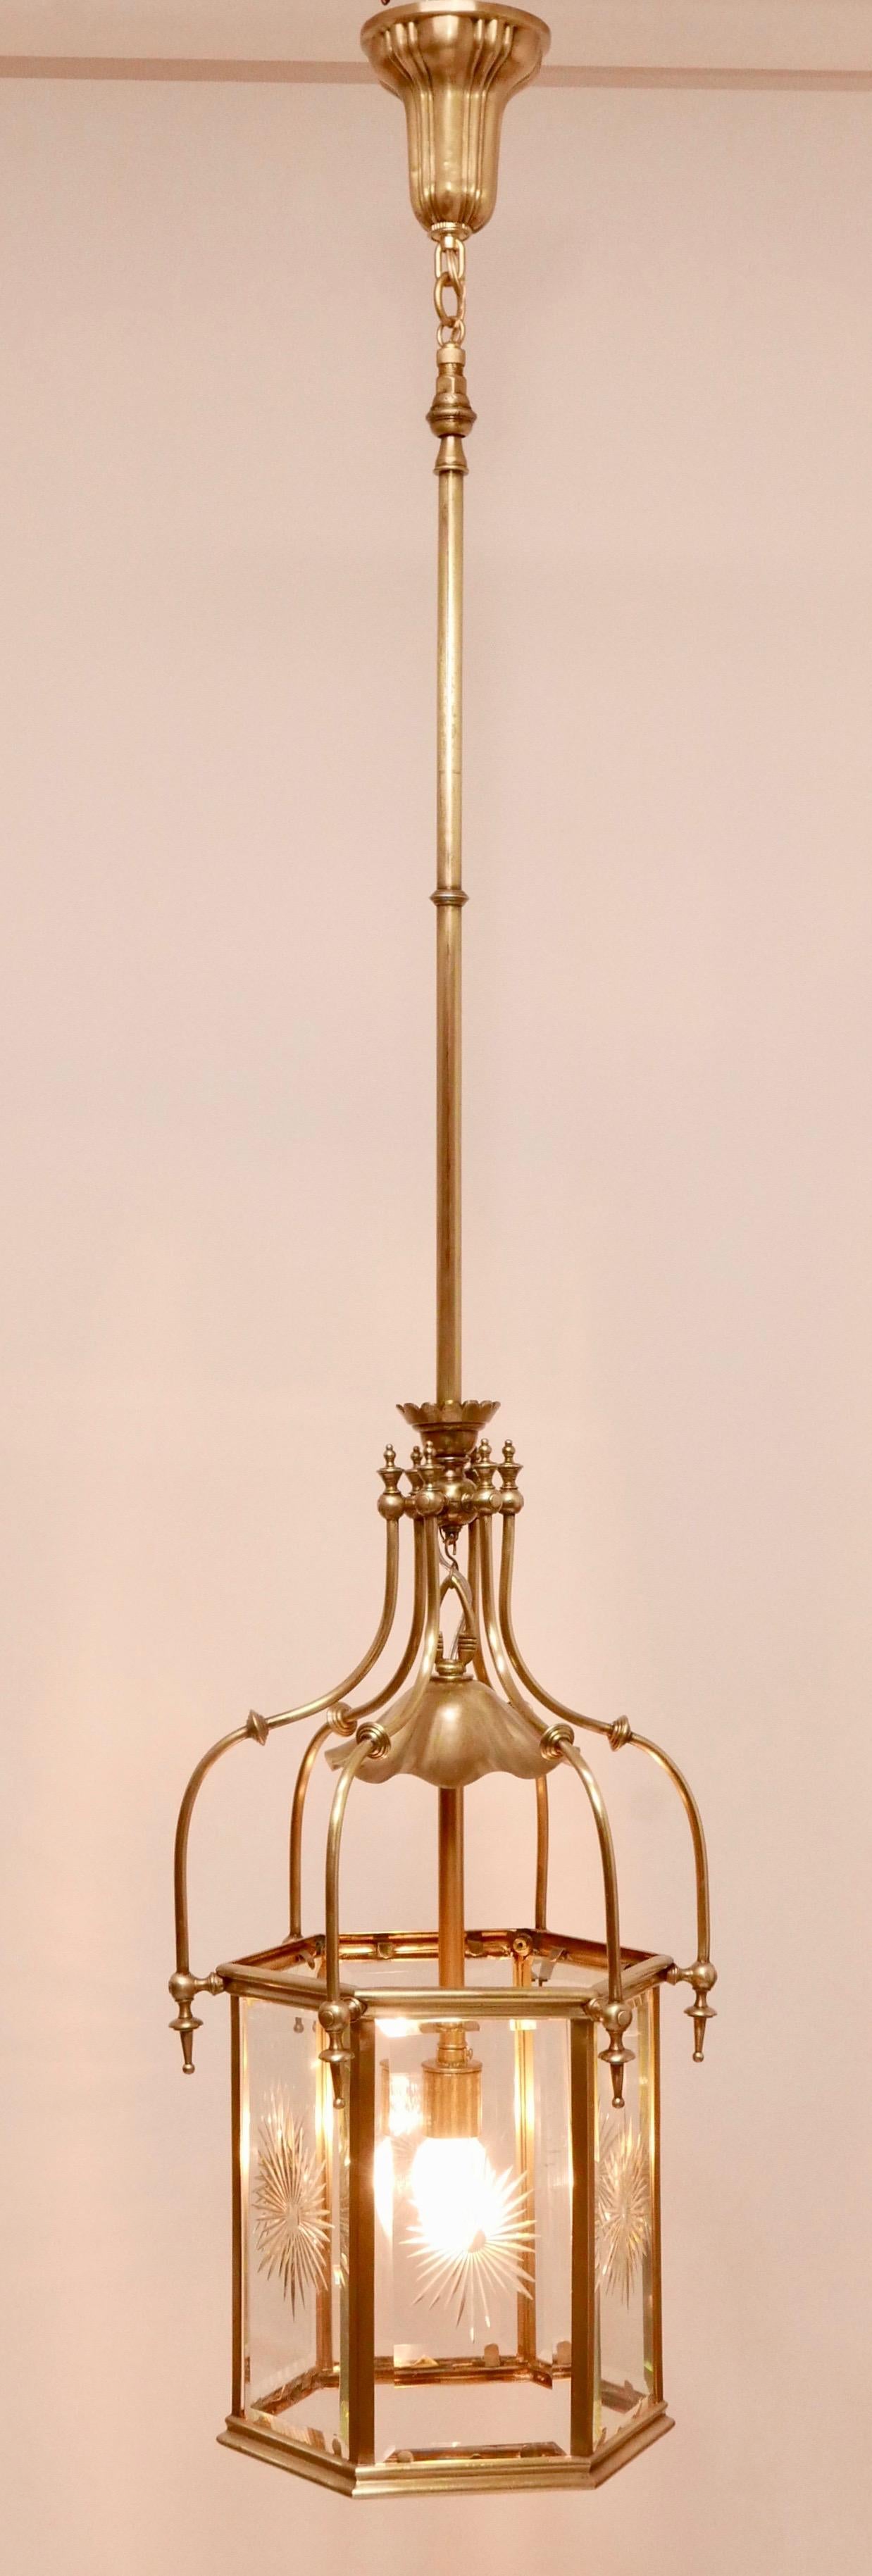 Exceptional 19th Century Brass & Cut Glass Hexagon Shaped Entry or Hall Lantern For Sale 4